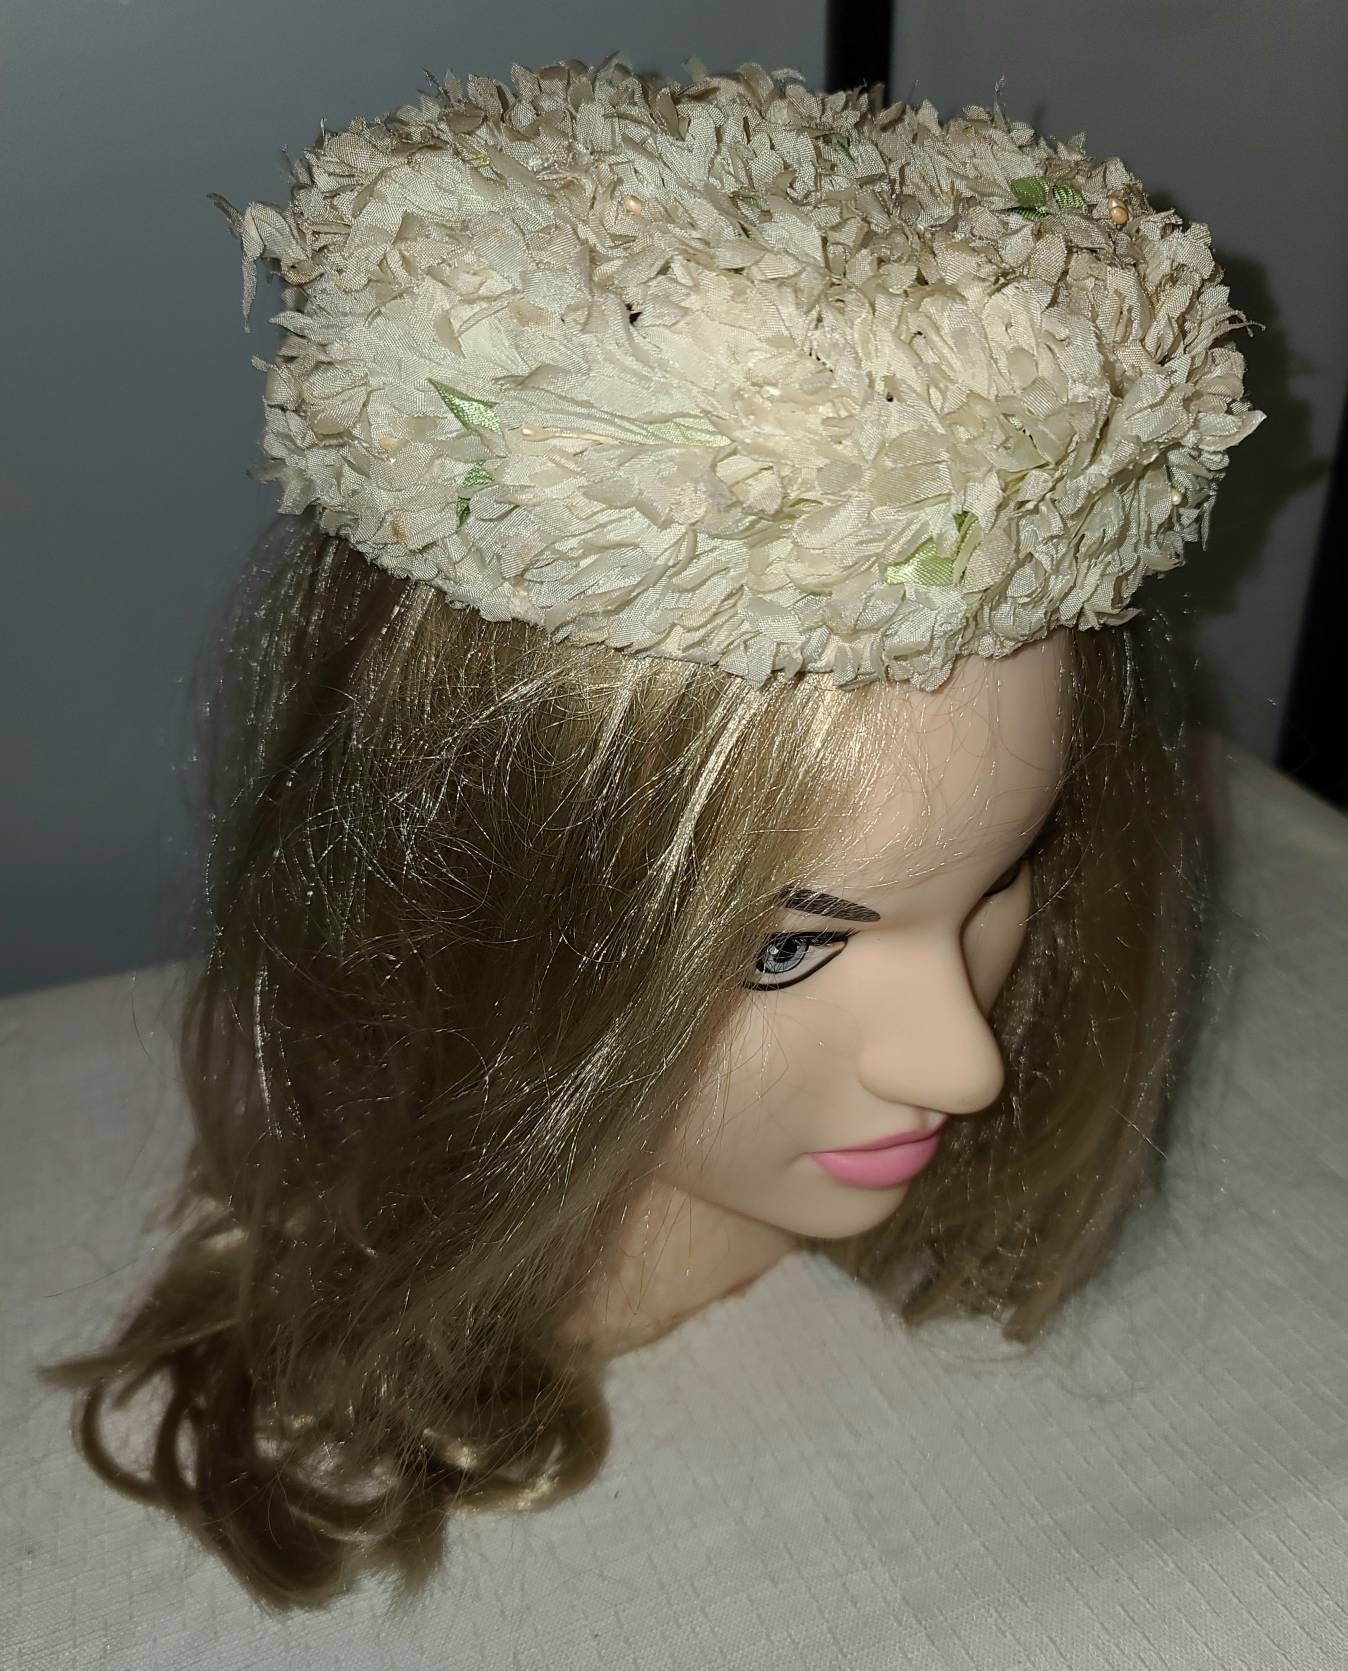 Vintage Floral Hat 1950s Small Round White Floral Perch Pillbox Hat Pearls Rockabilly Wedding Bridal 18.5 in.